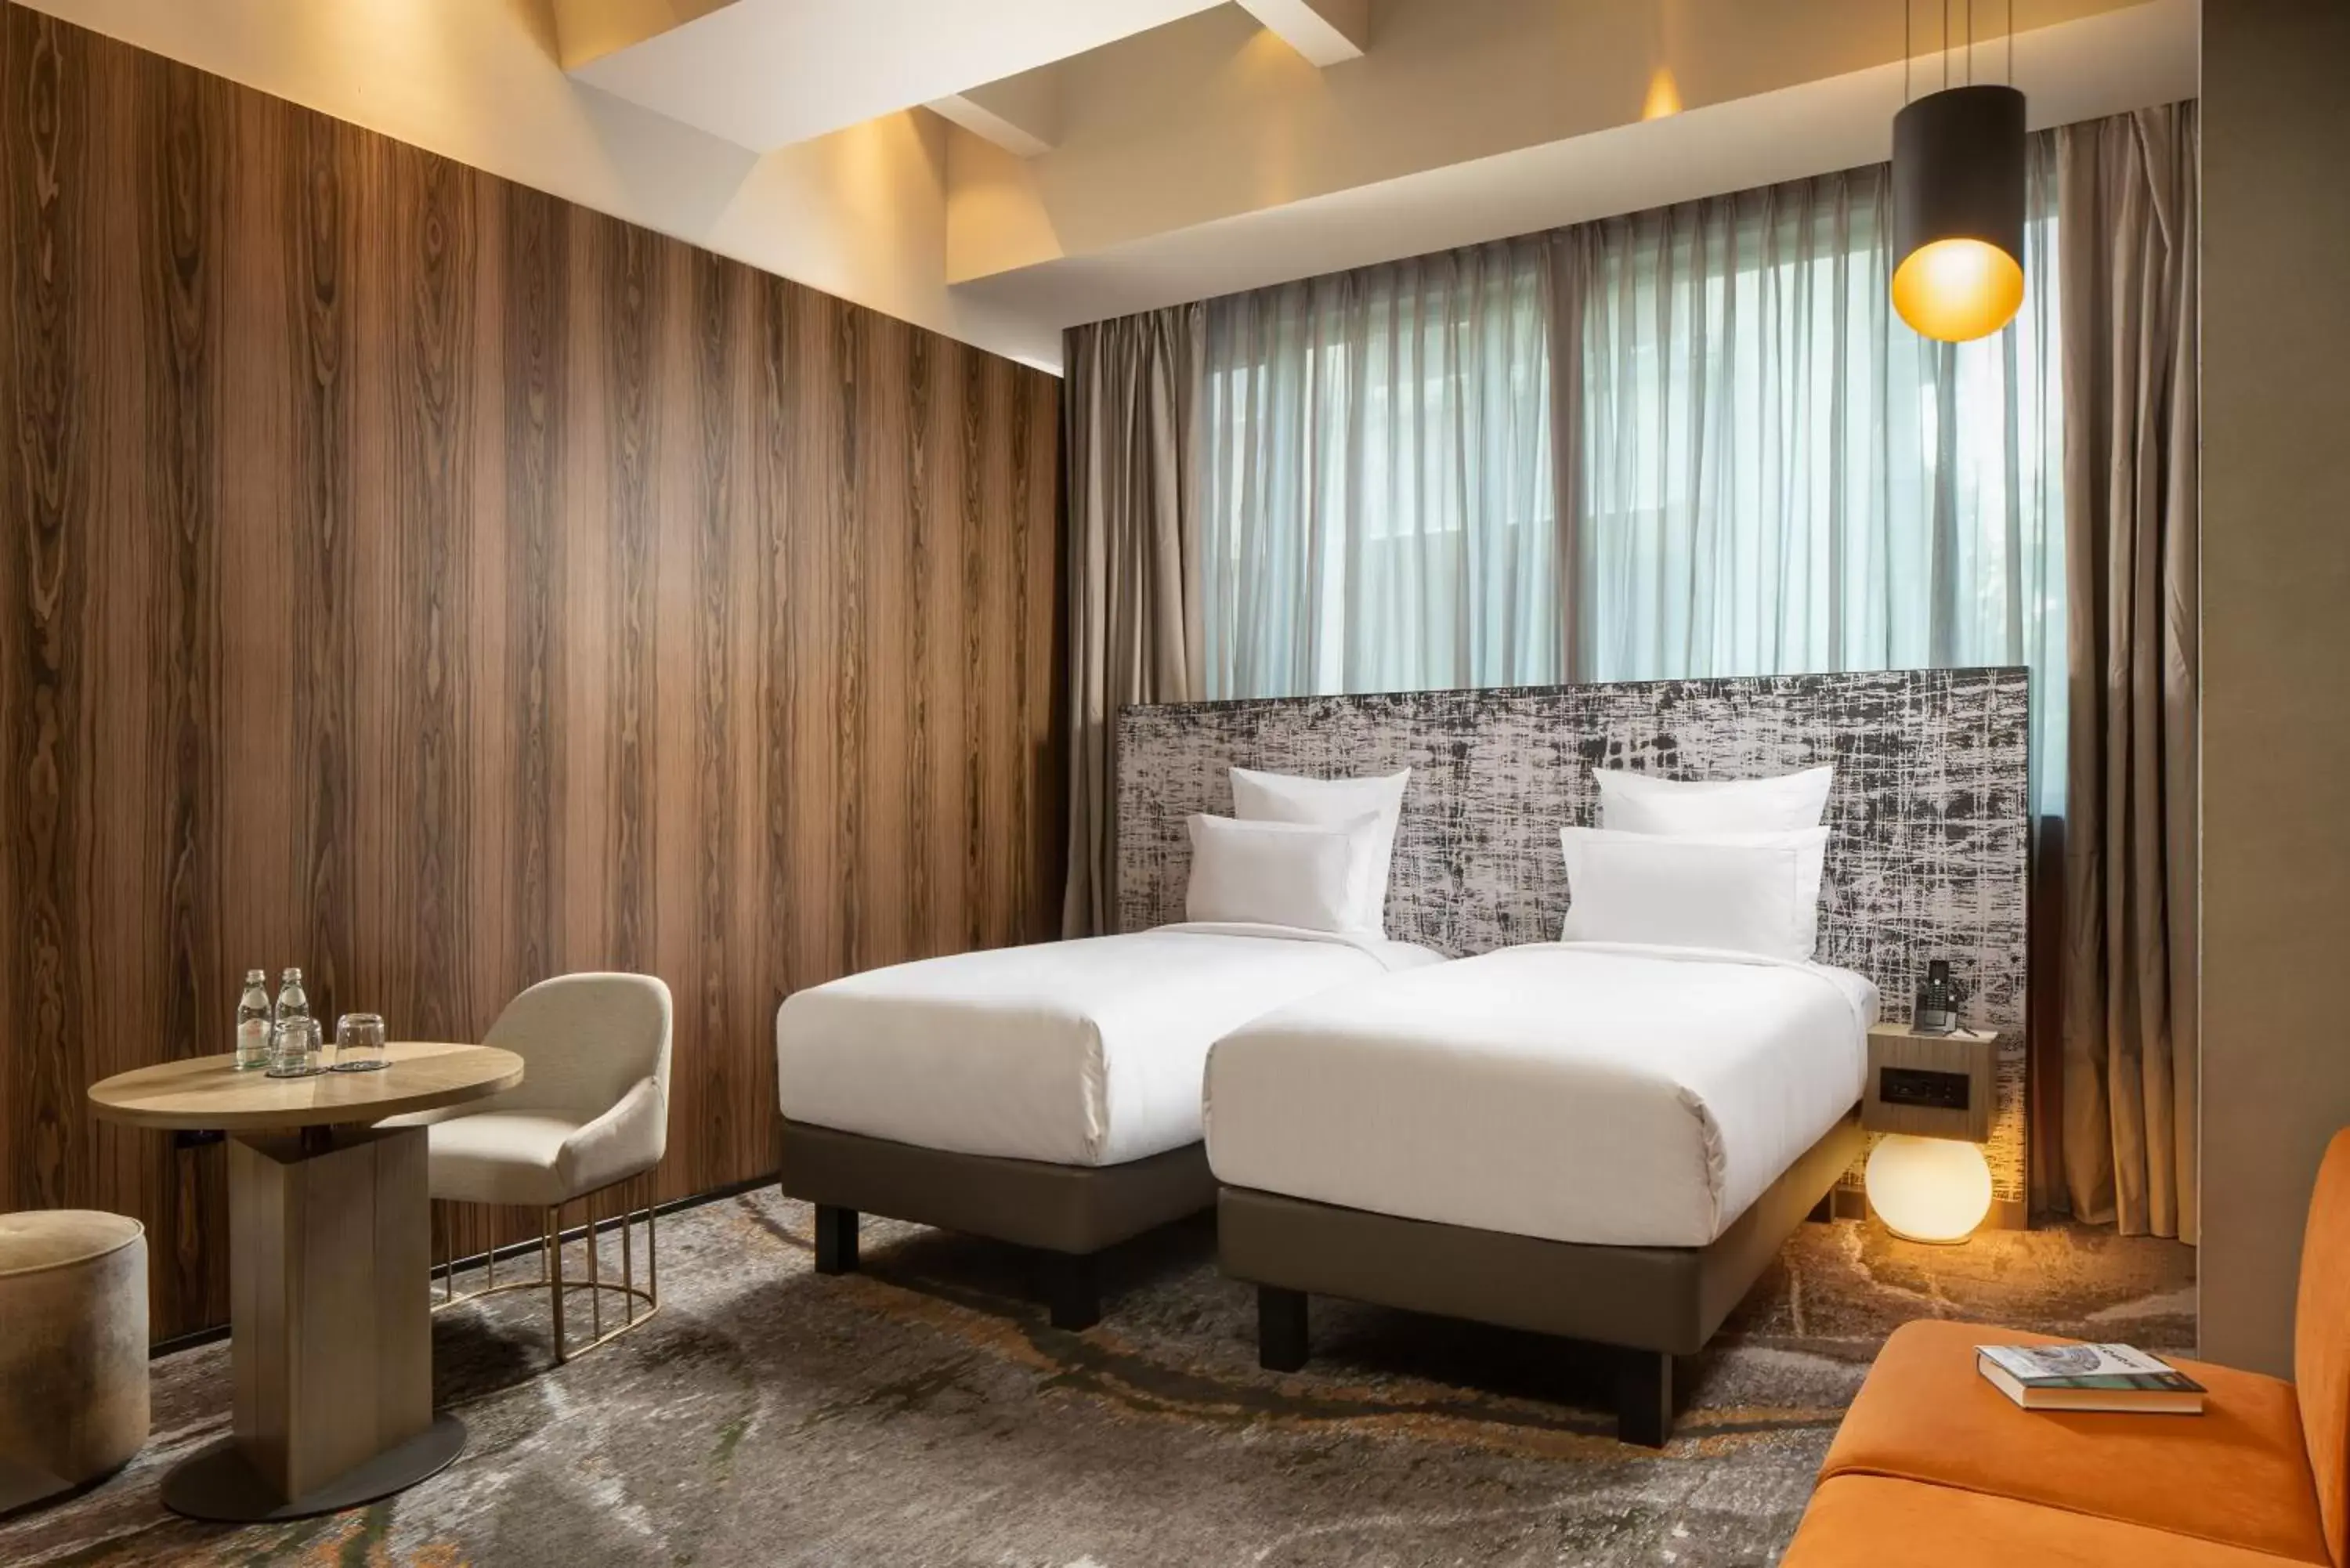 Superior Twin Room in The Emporium Plovdiv - MGALLERY The Best 5-Star Boutique Hotel on The Balkans for 2022